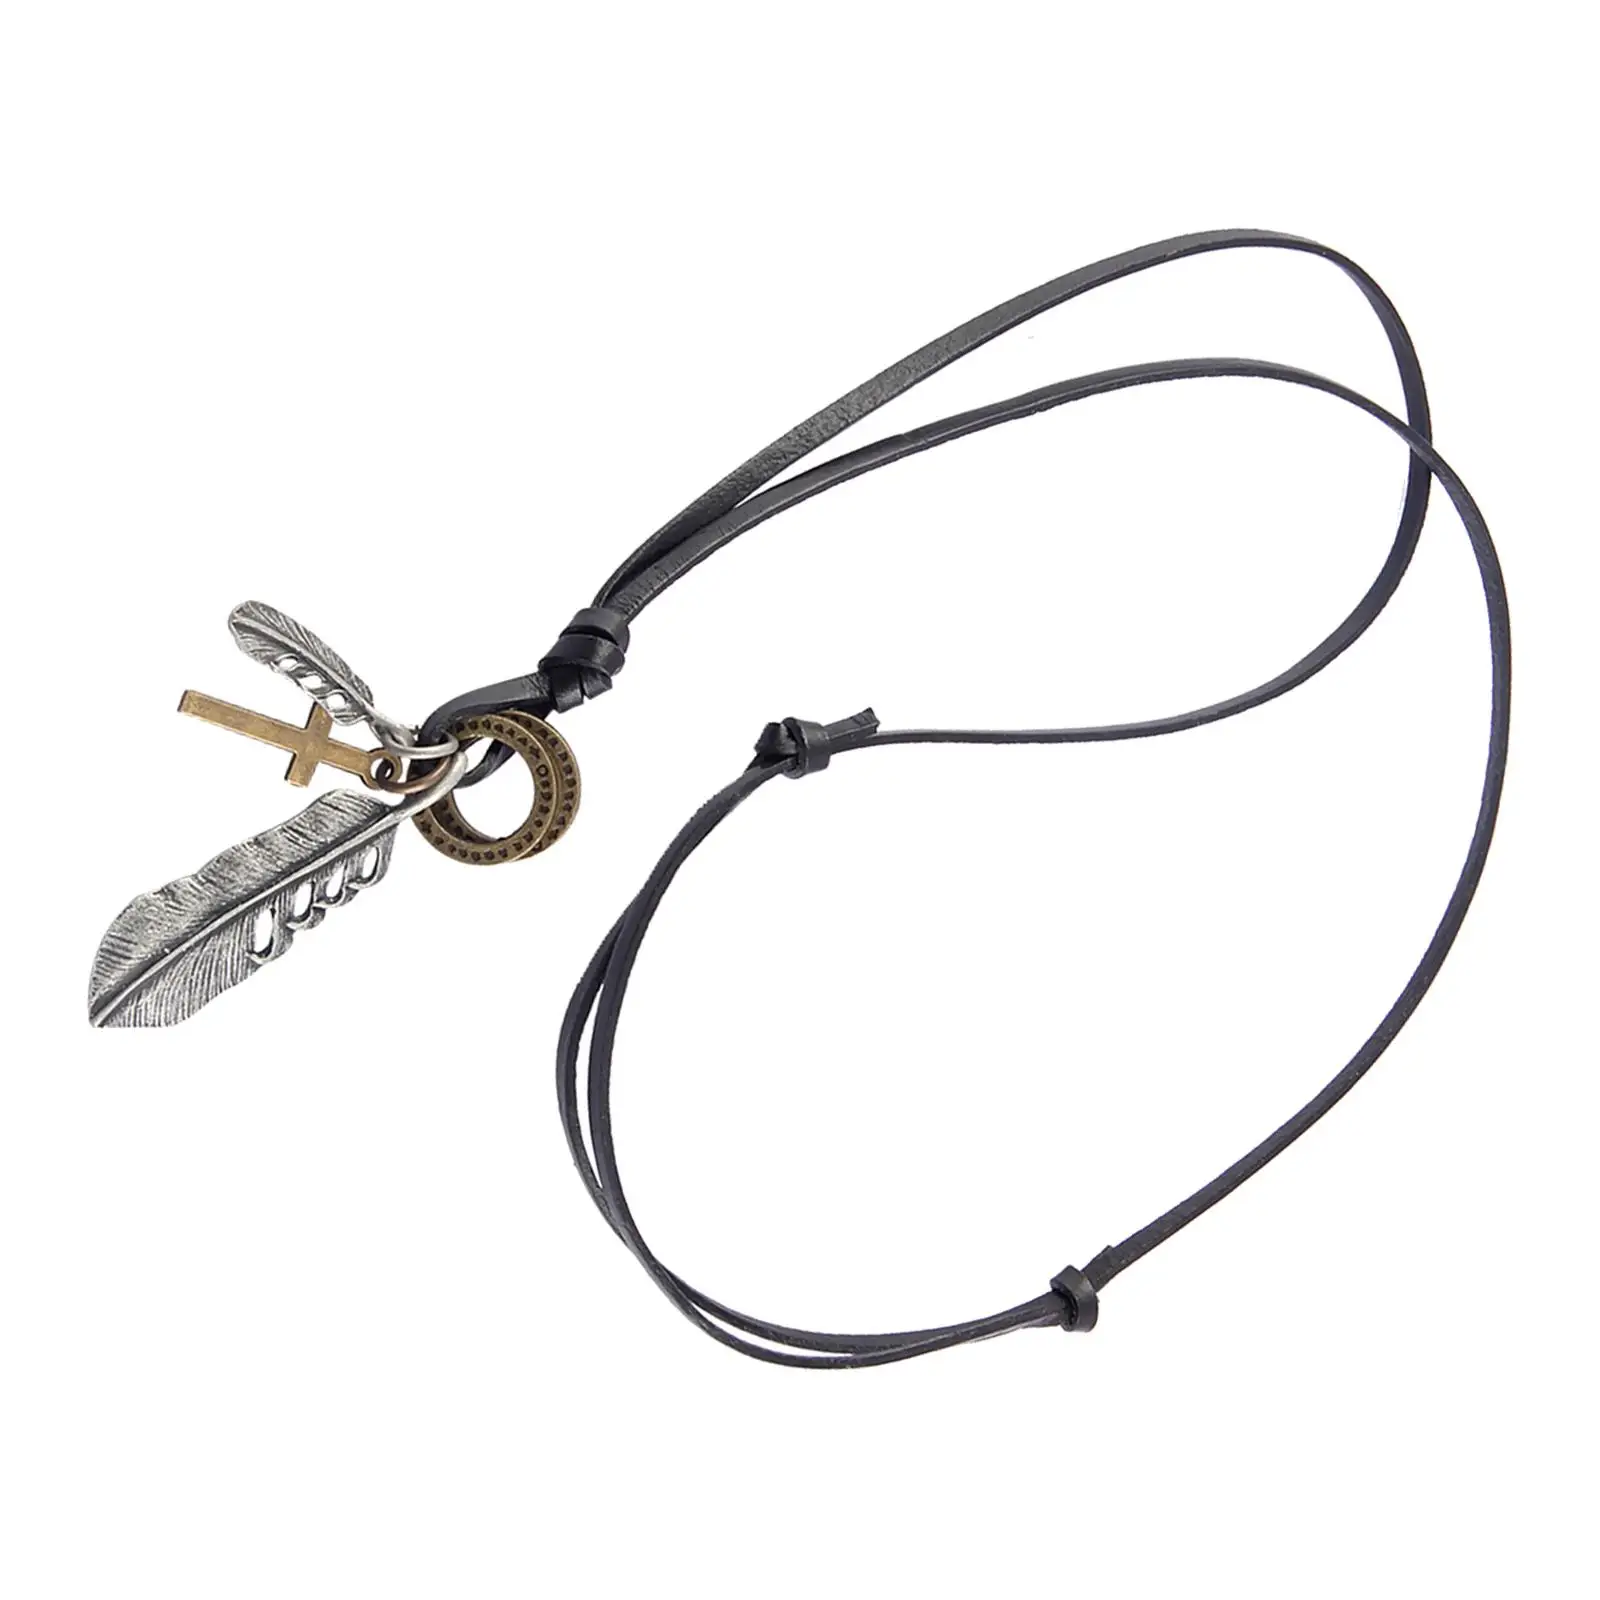 Simple Necklace Jewelry Hip Hop PU Leather Cord Adjustable Trendy Bola Tie for Daily Work